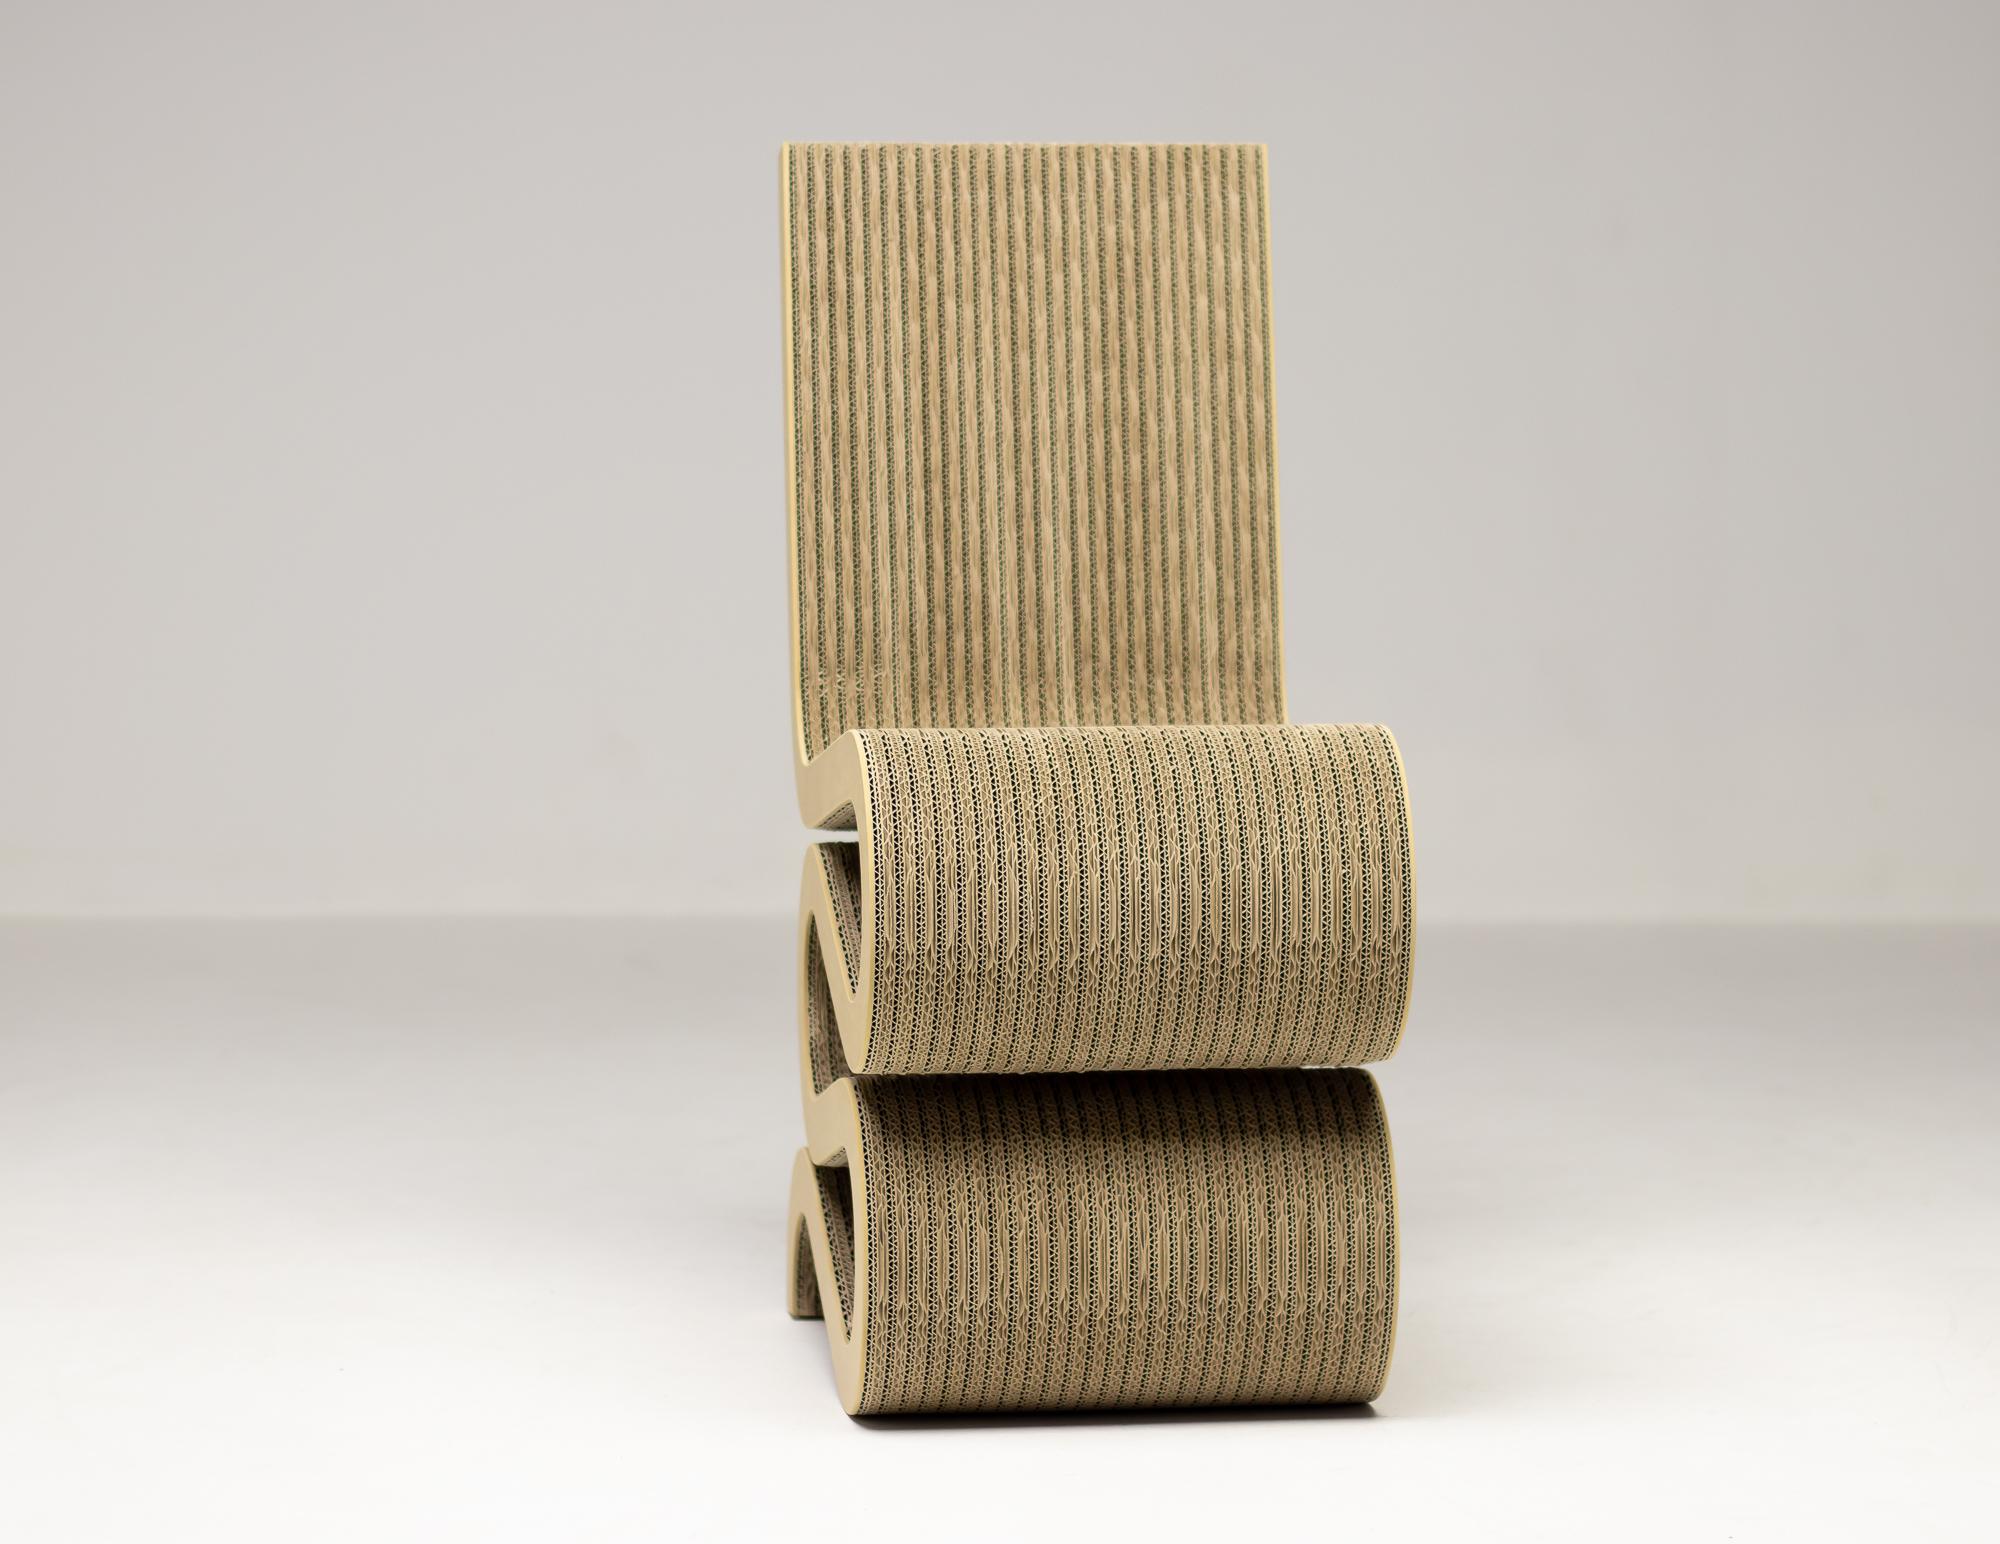 Frank Gehry Wiggle Chair 1